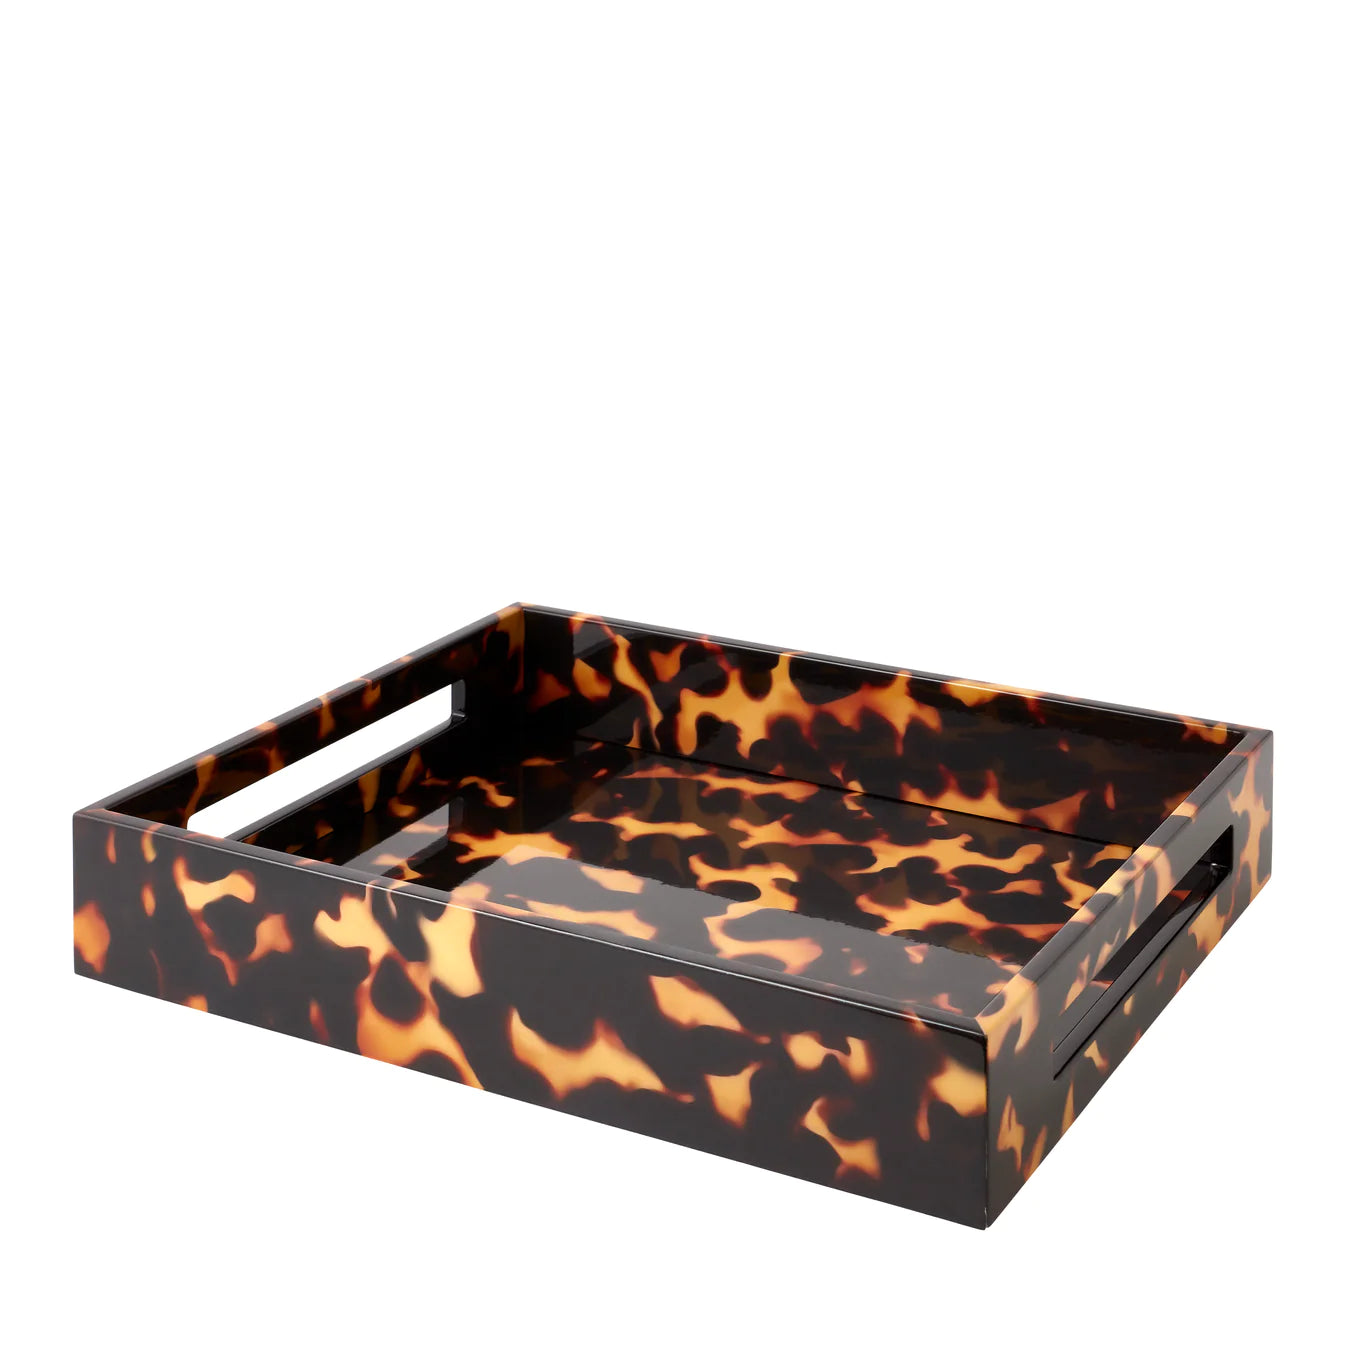 Lacquered Tortoise Tray - The Preppy Bunny